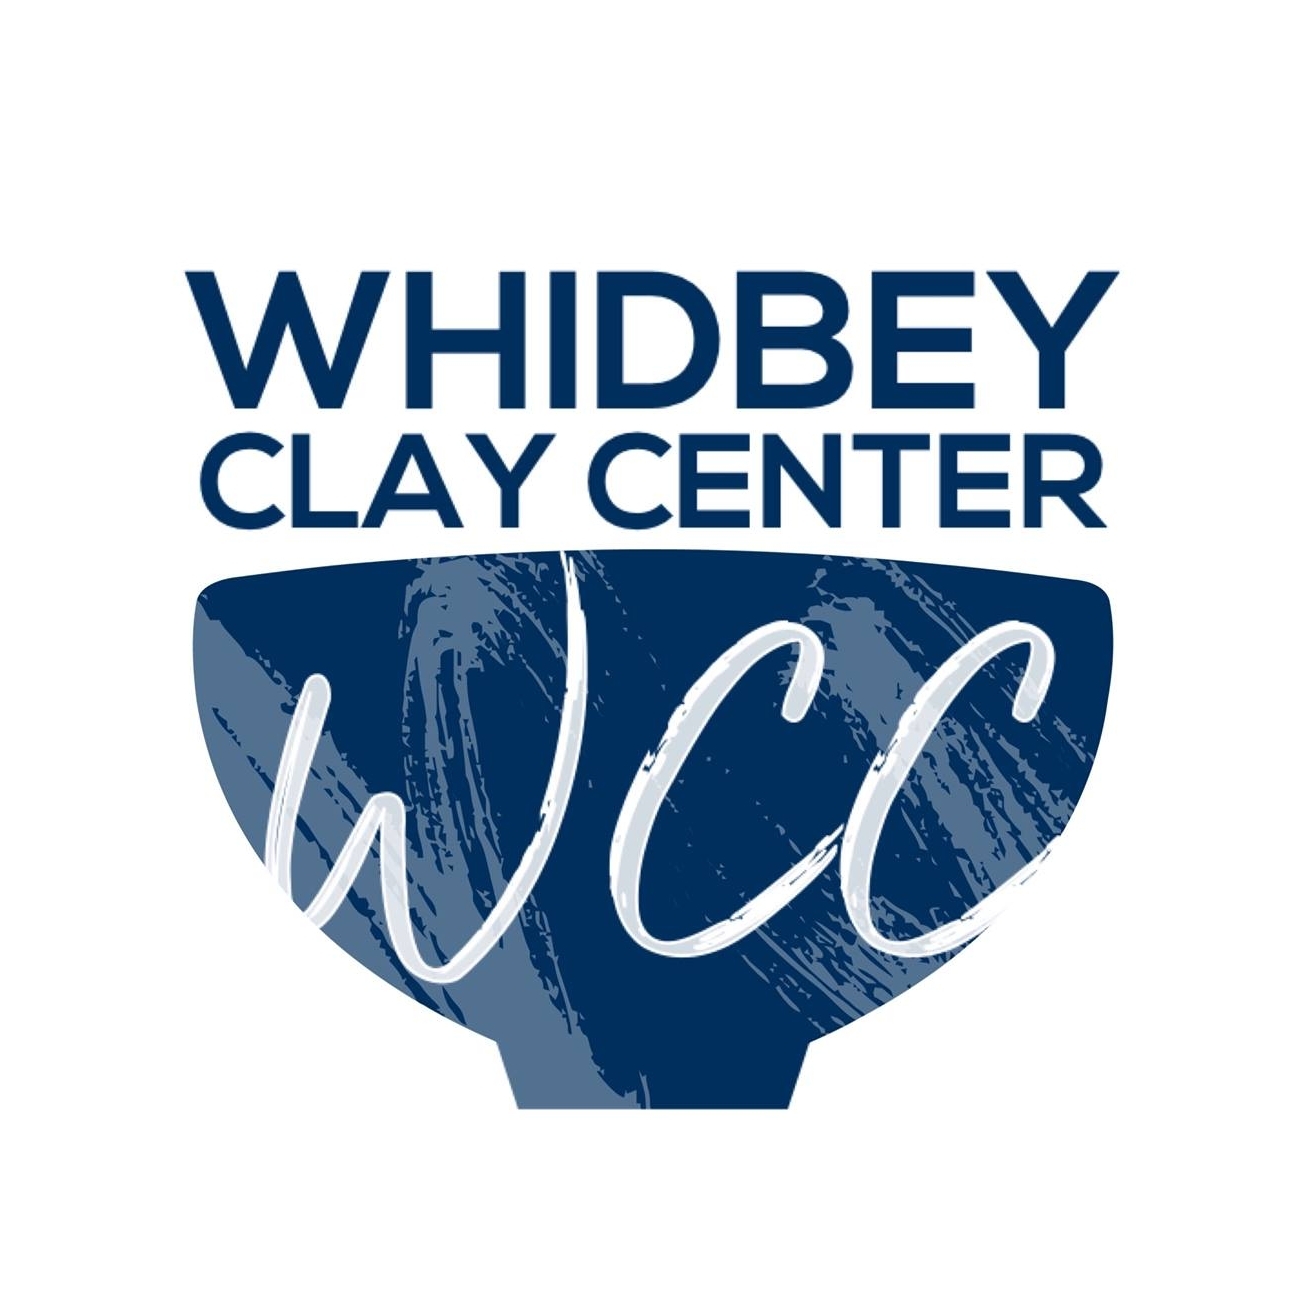 Whidbey Clay Center (Grand Opening November 27, 2022)